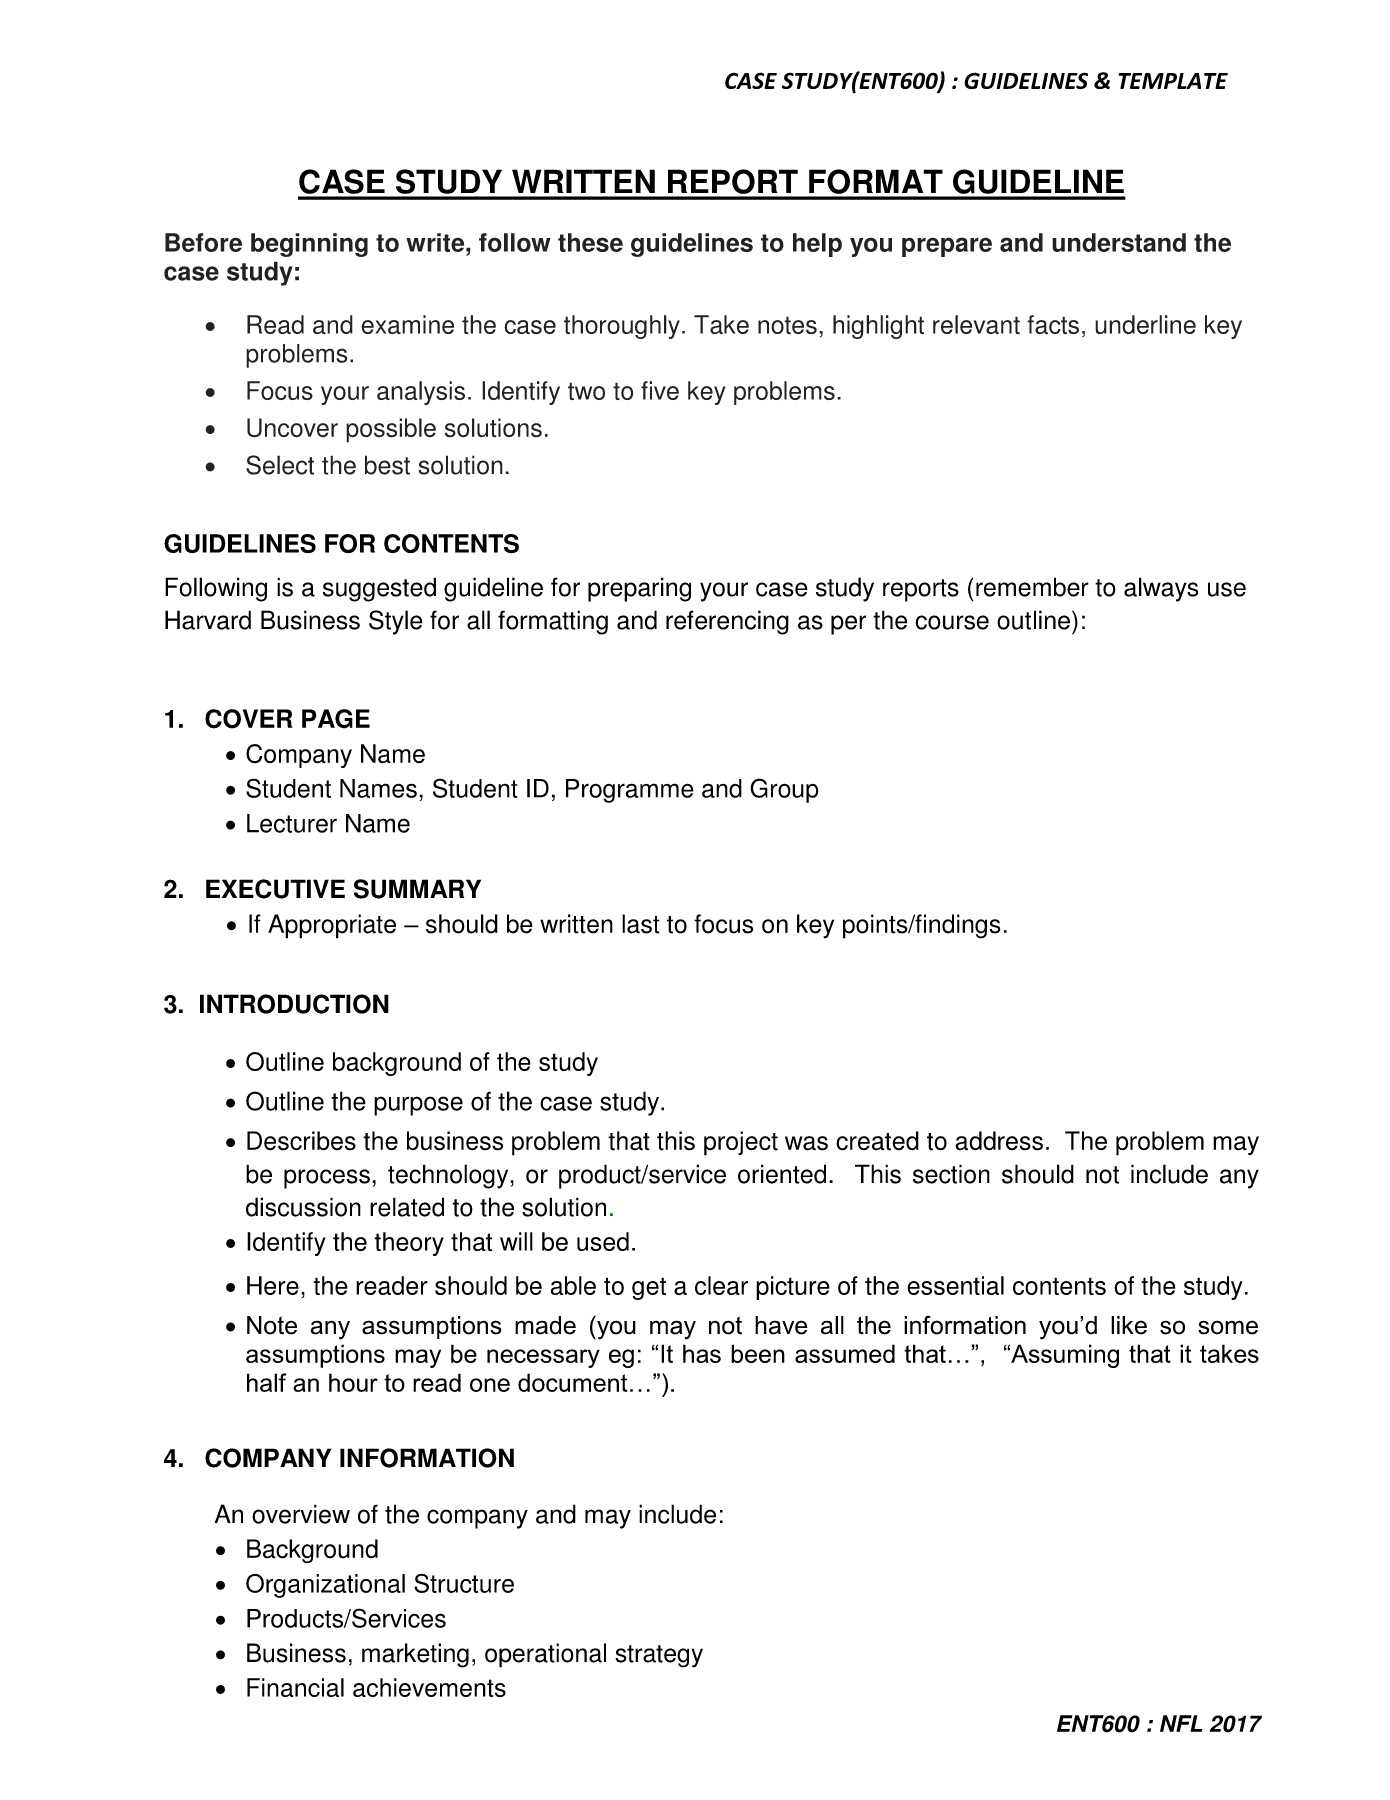 Ent600 Case Study Guidelines & Template Pages 1 – 5 – Text In Report Content Page Template